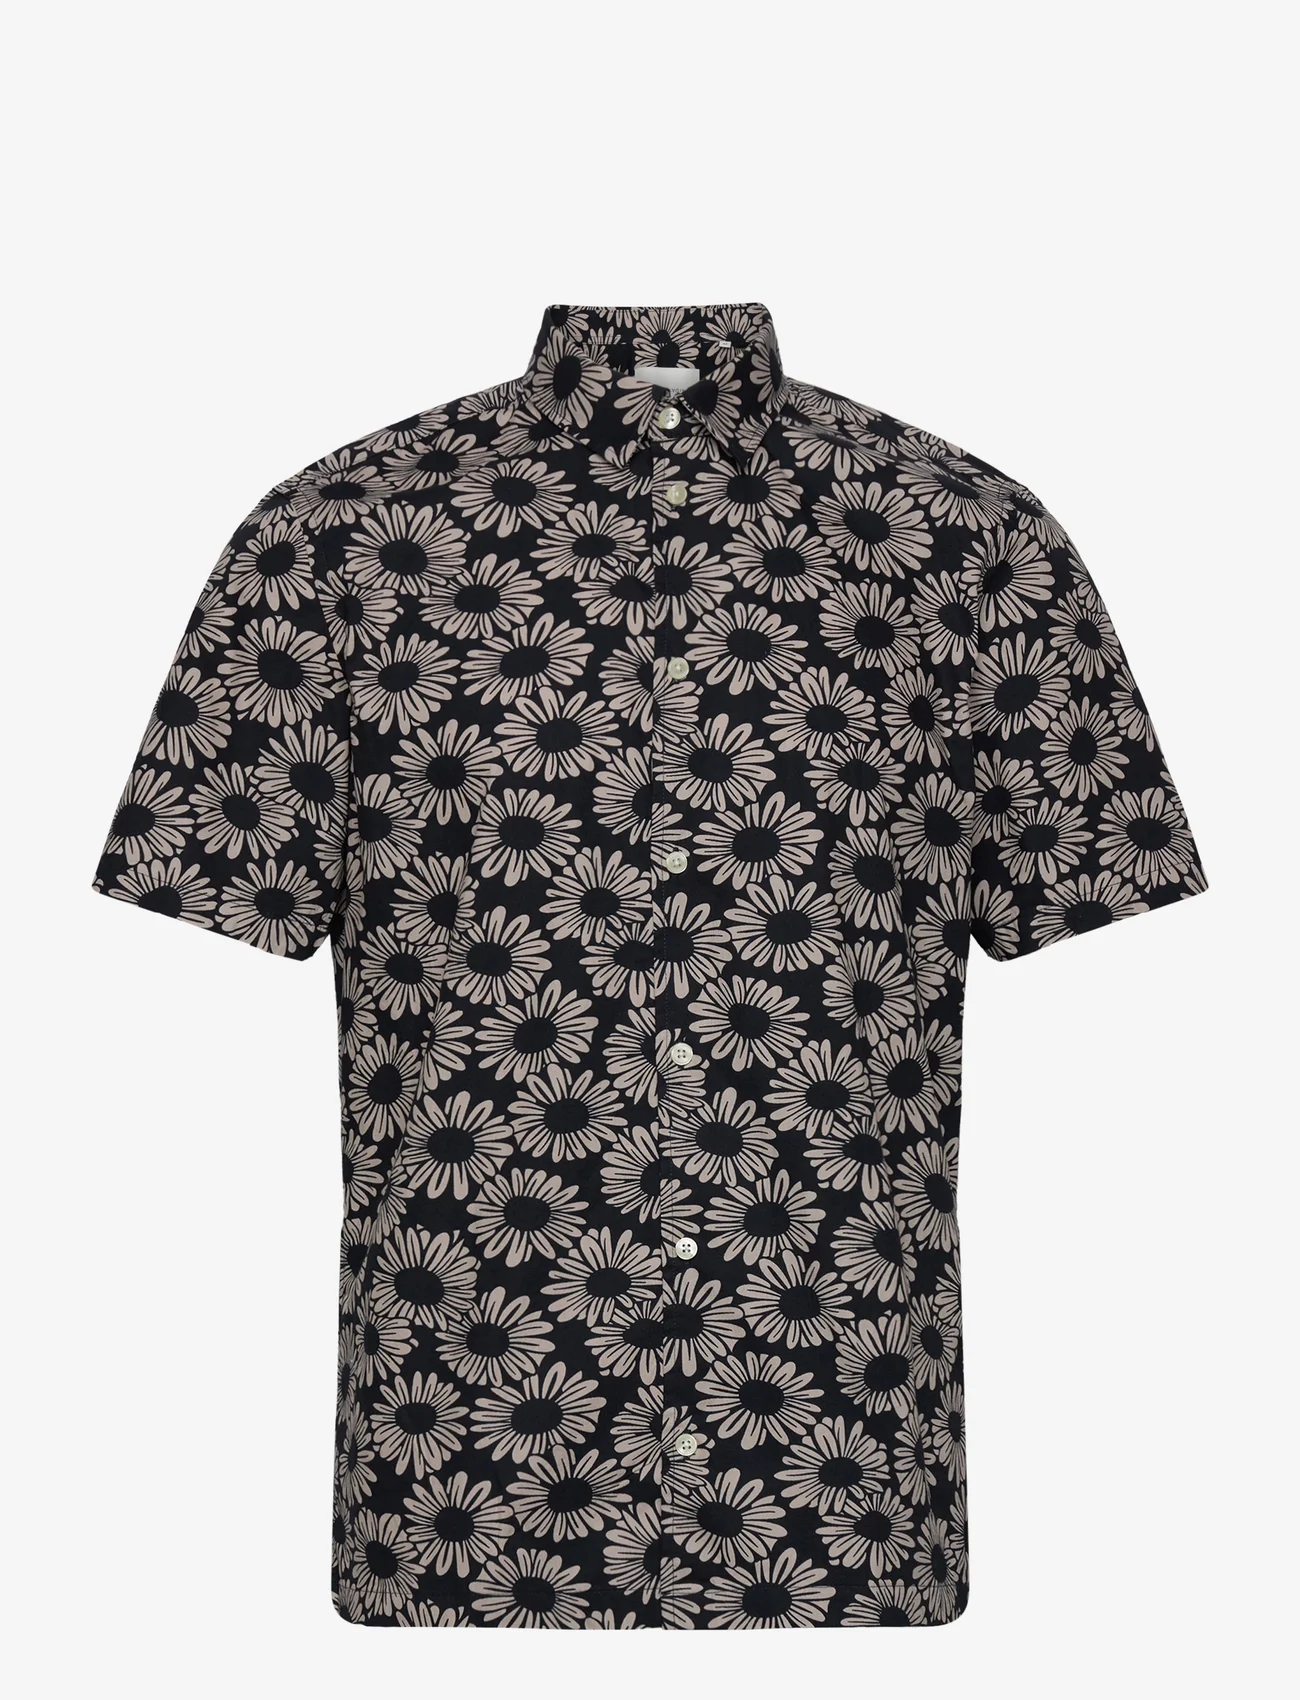 Casual Friday - CFAnton SS flower printed shirt - lowest prices - dark navy - 0